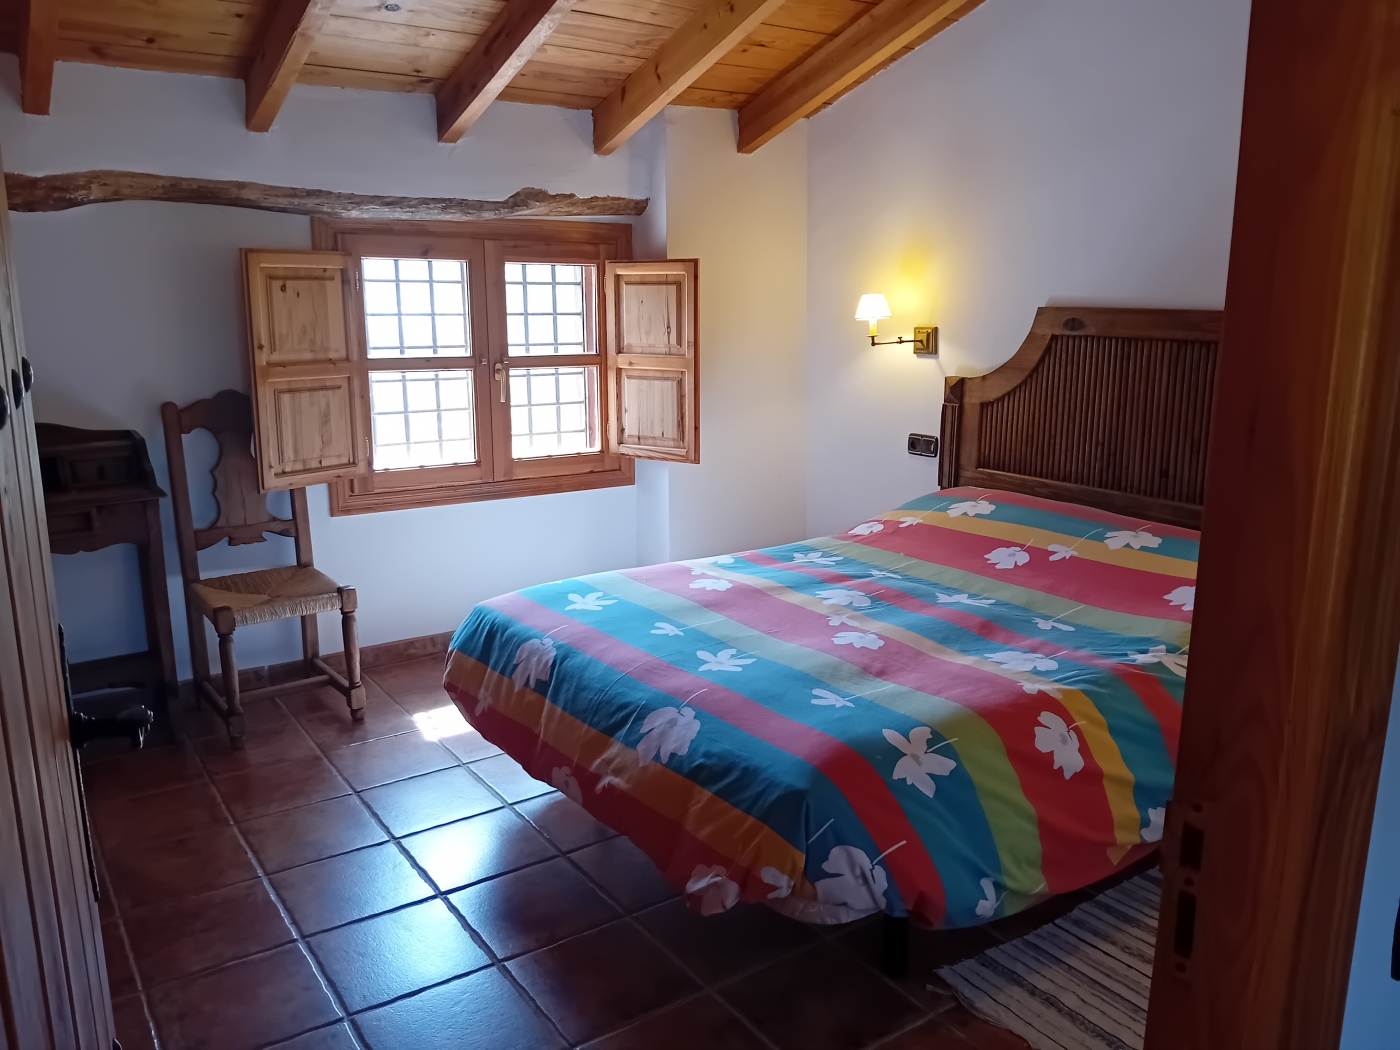 ES173630: Commercial Property  in Huescar